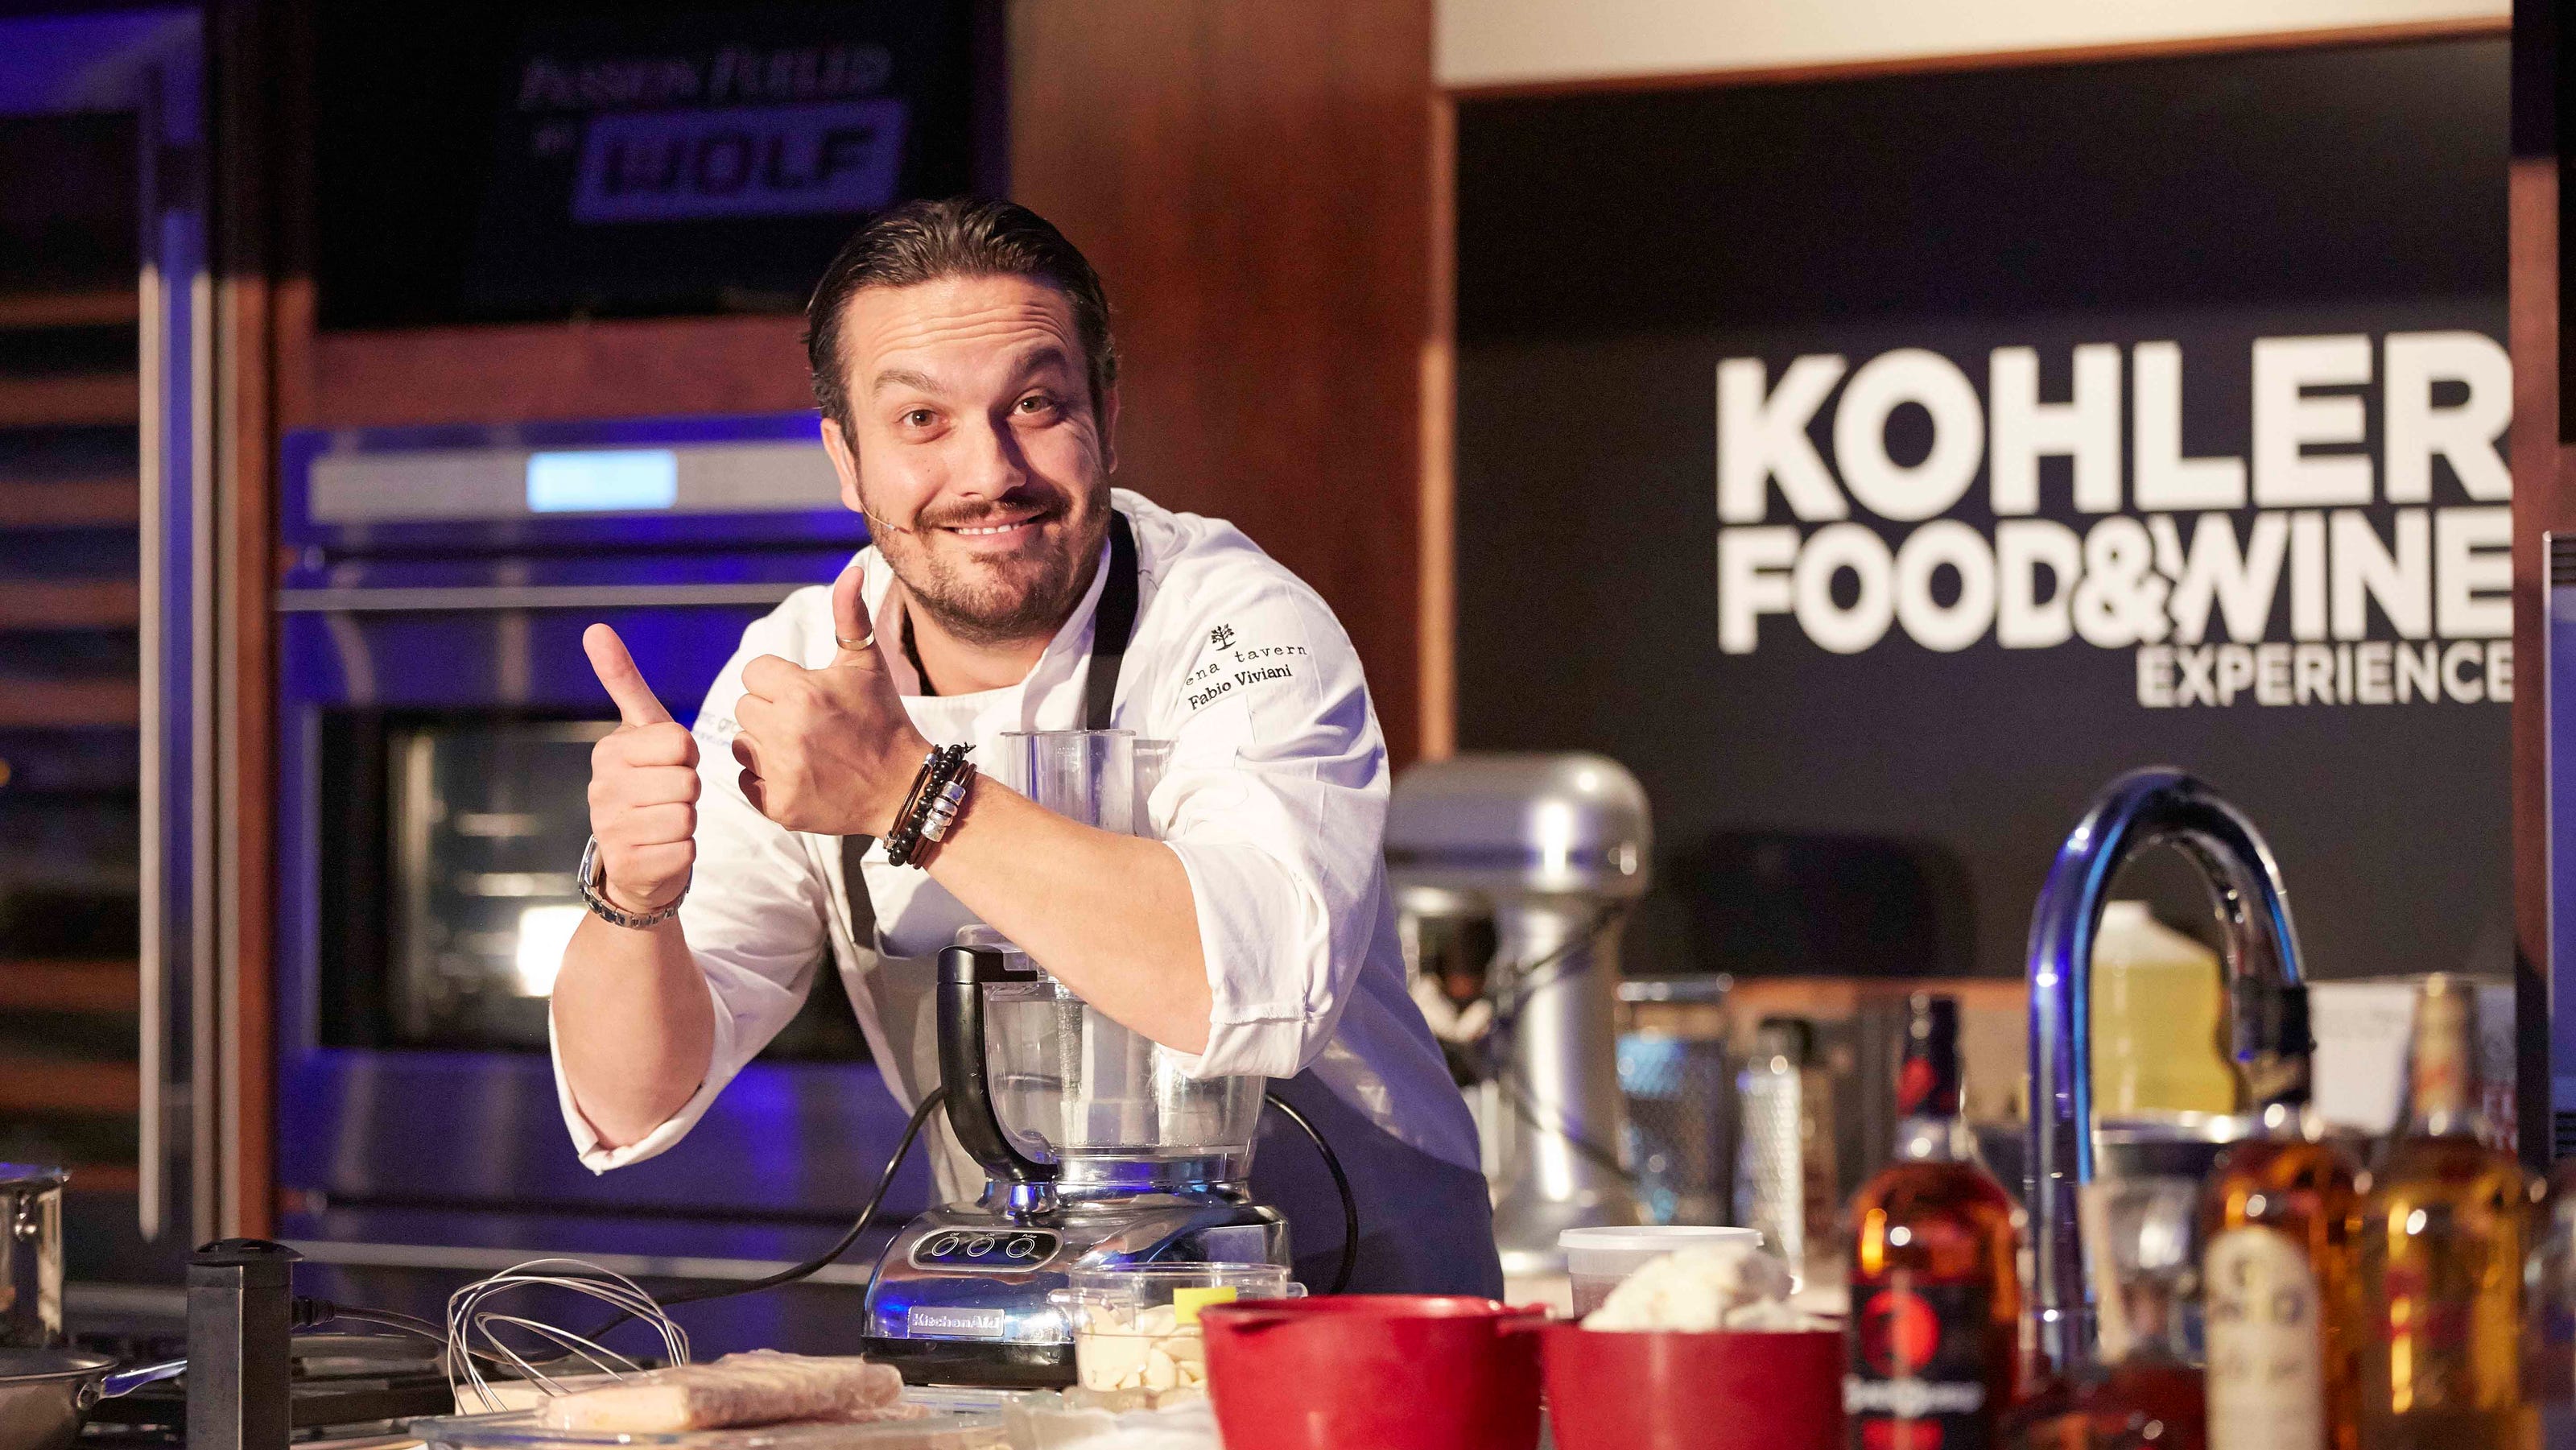 Kohler Food & Wine fest sets its chef lineup; tickets are on sale now